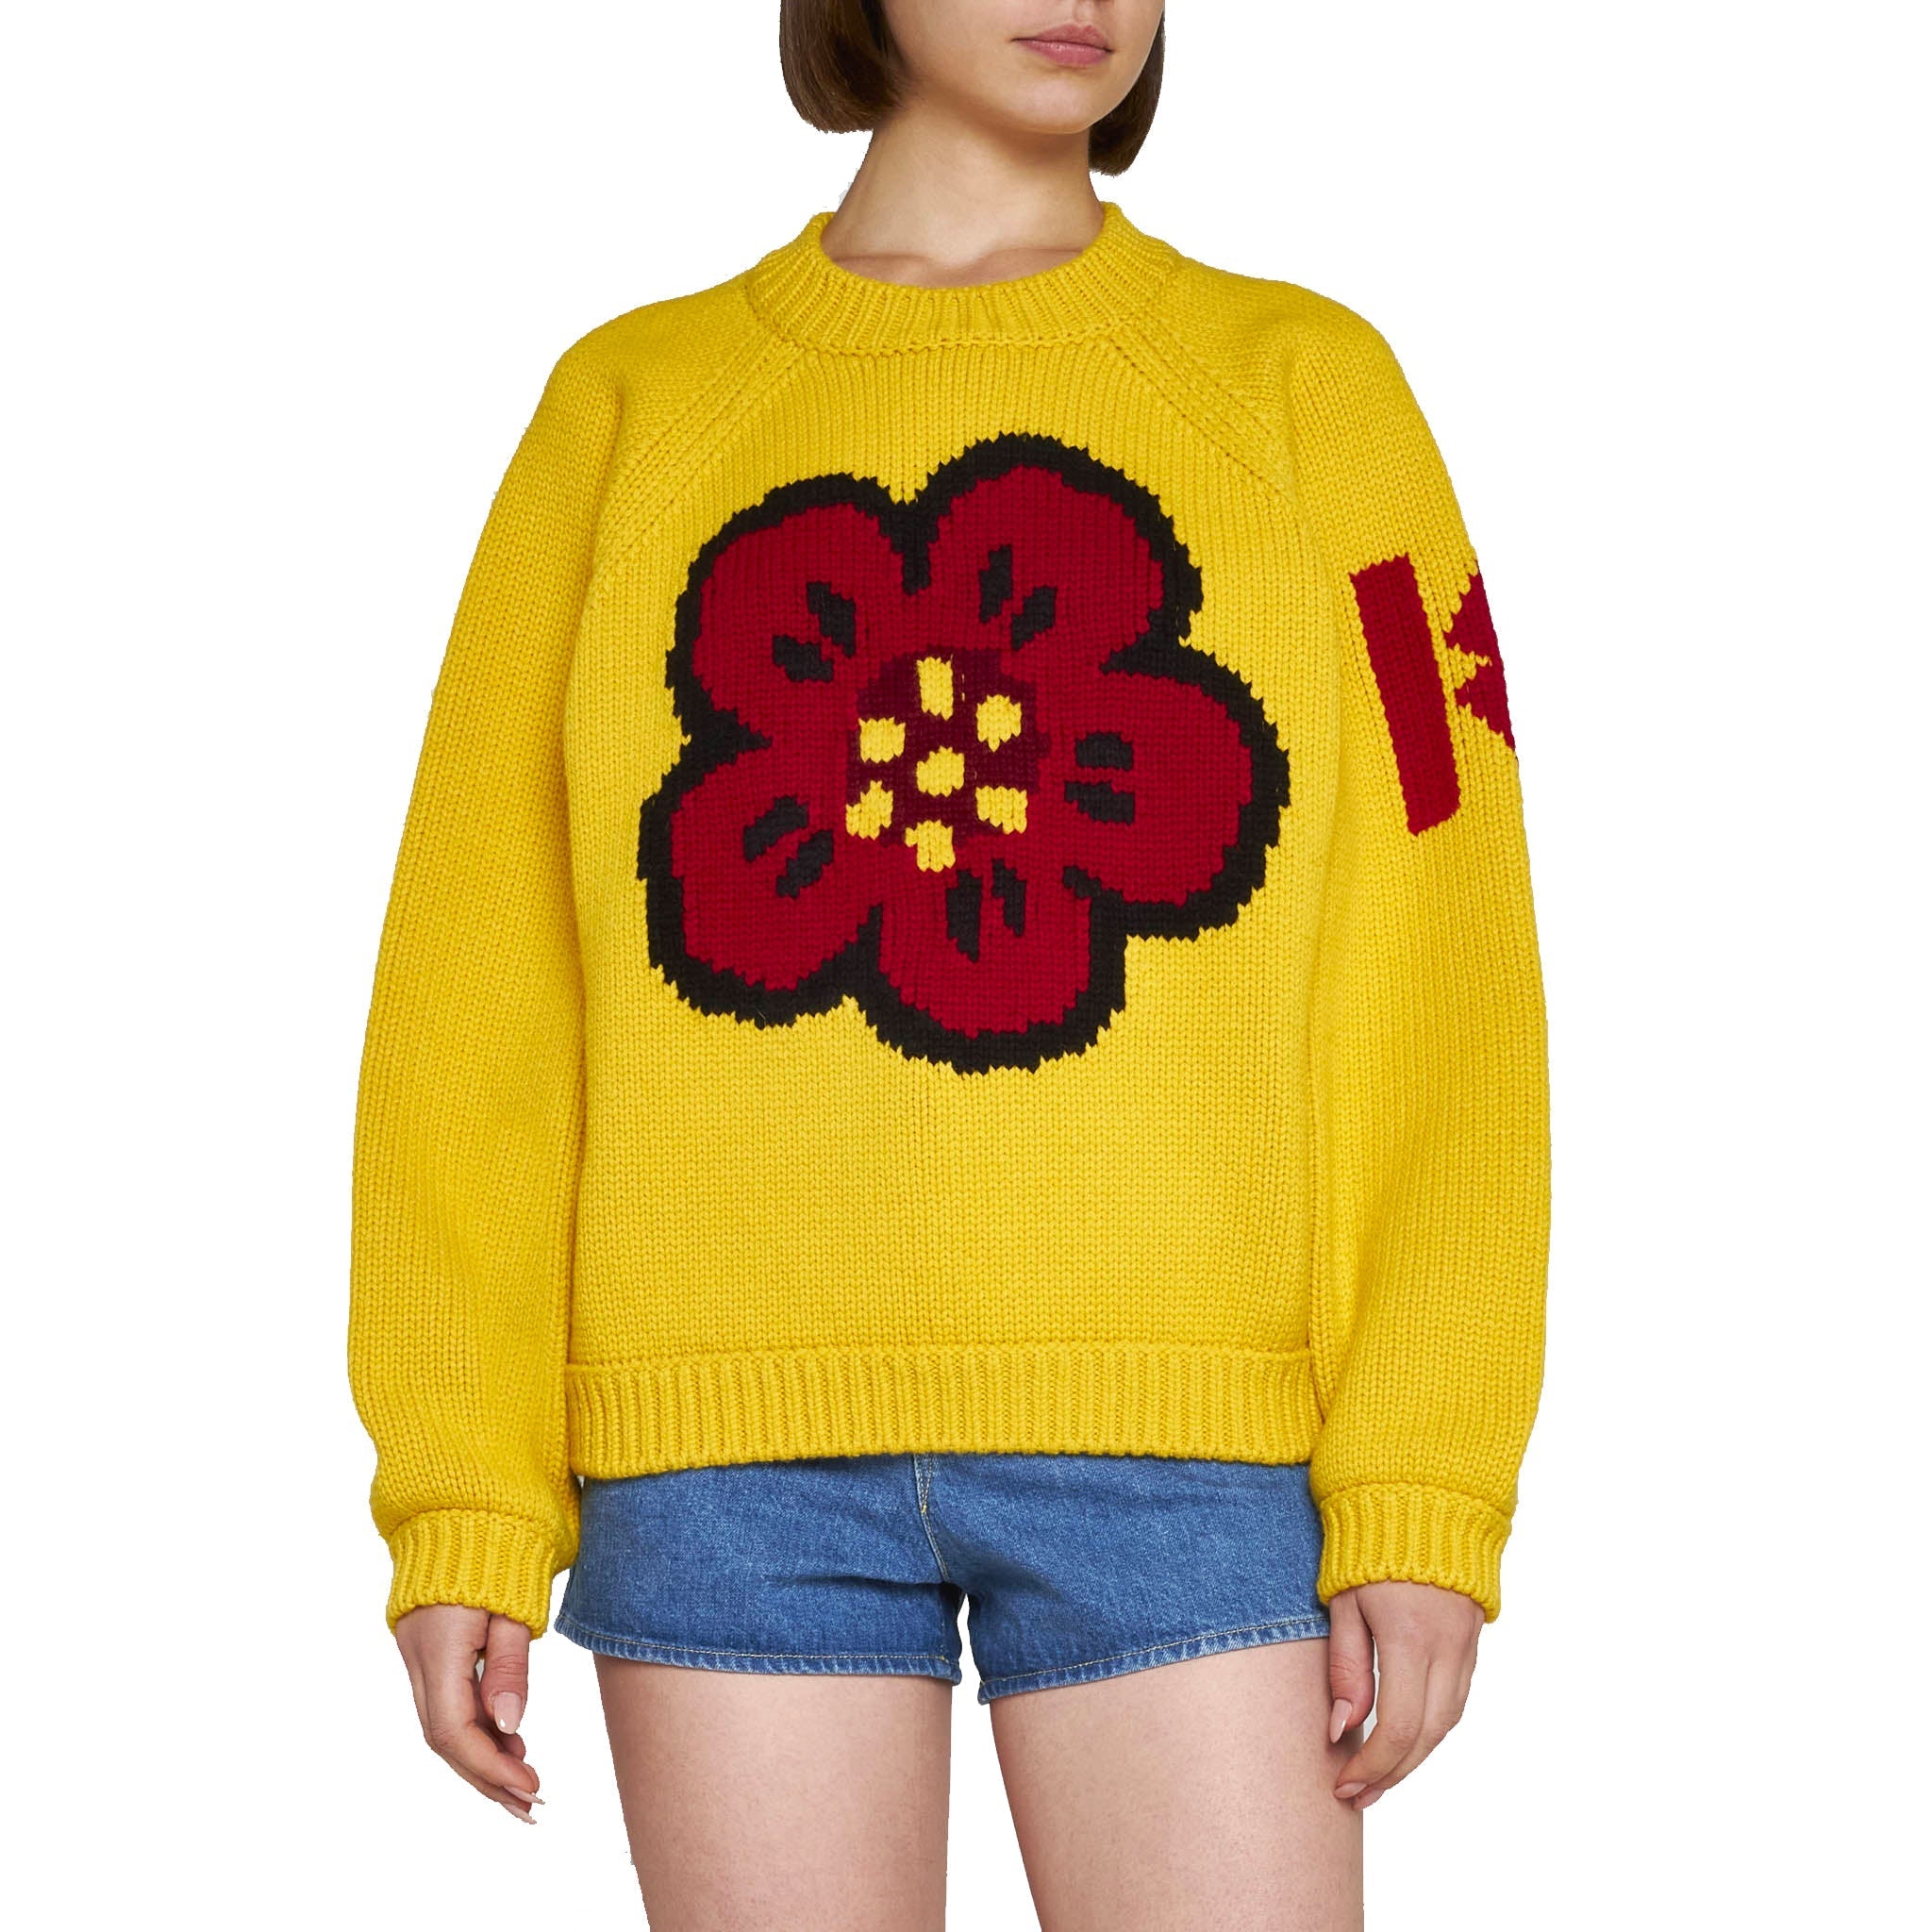 KENZO-OUTLET-SALE-Kenzo-Cotton-Pullover-Strick-YELLOW-M-ARCHIVE-COLLECTION-2.jpg